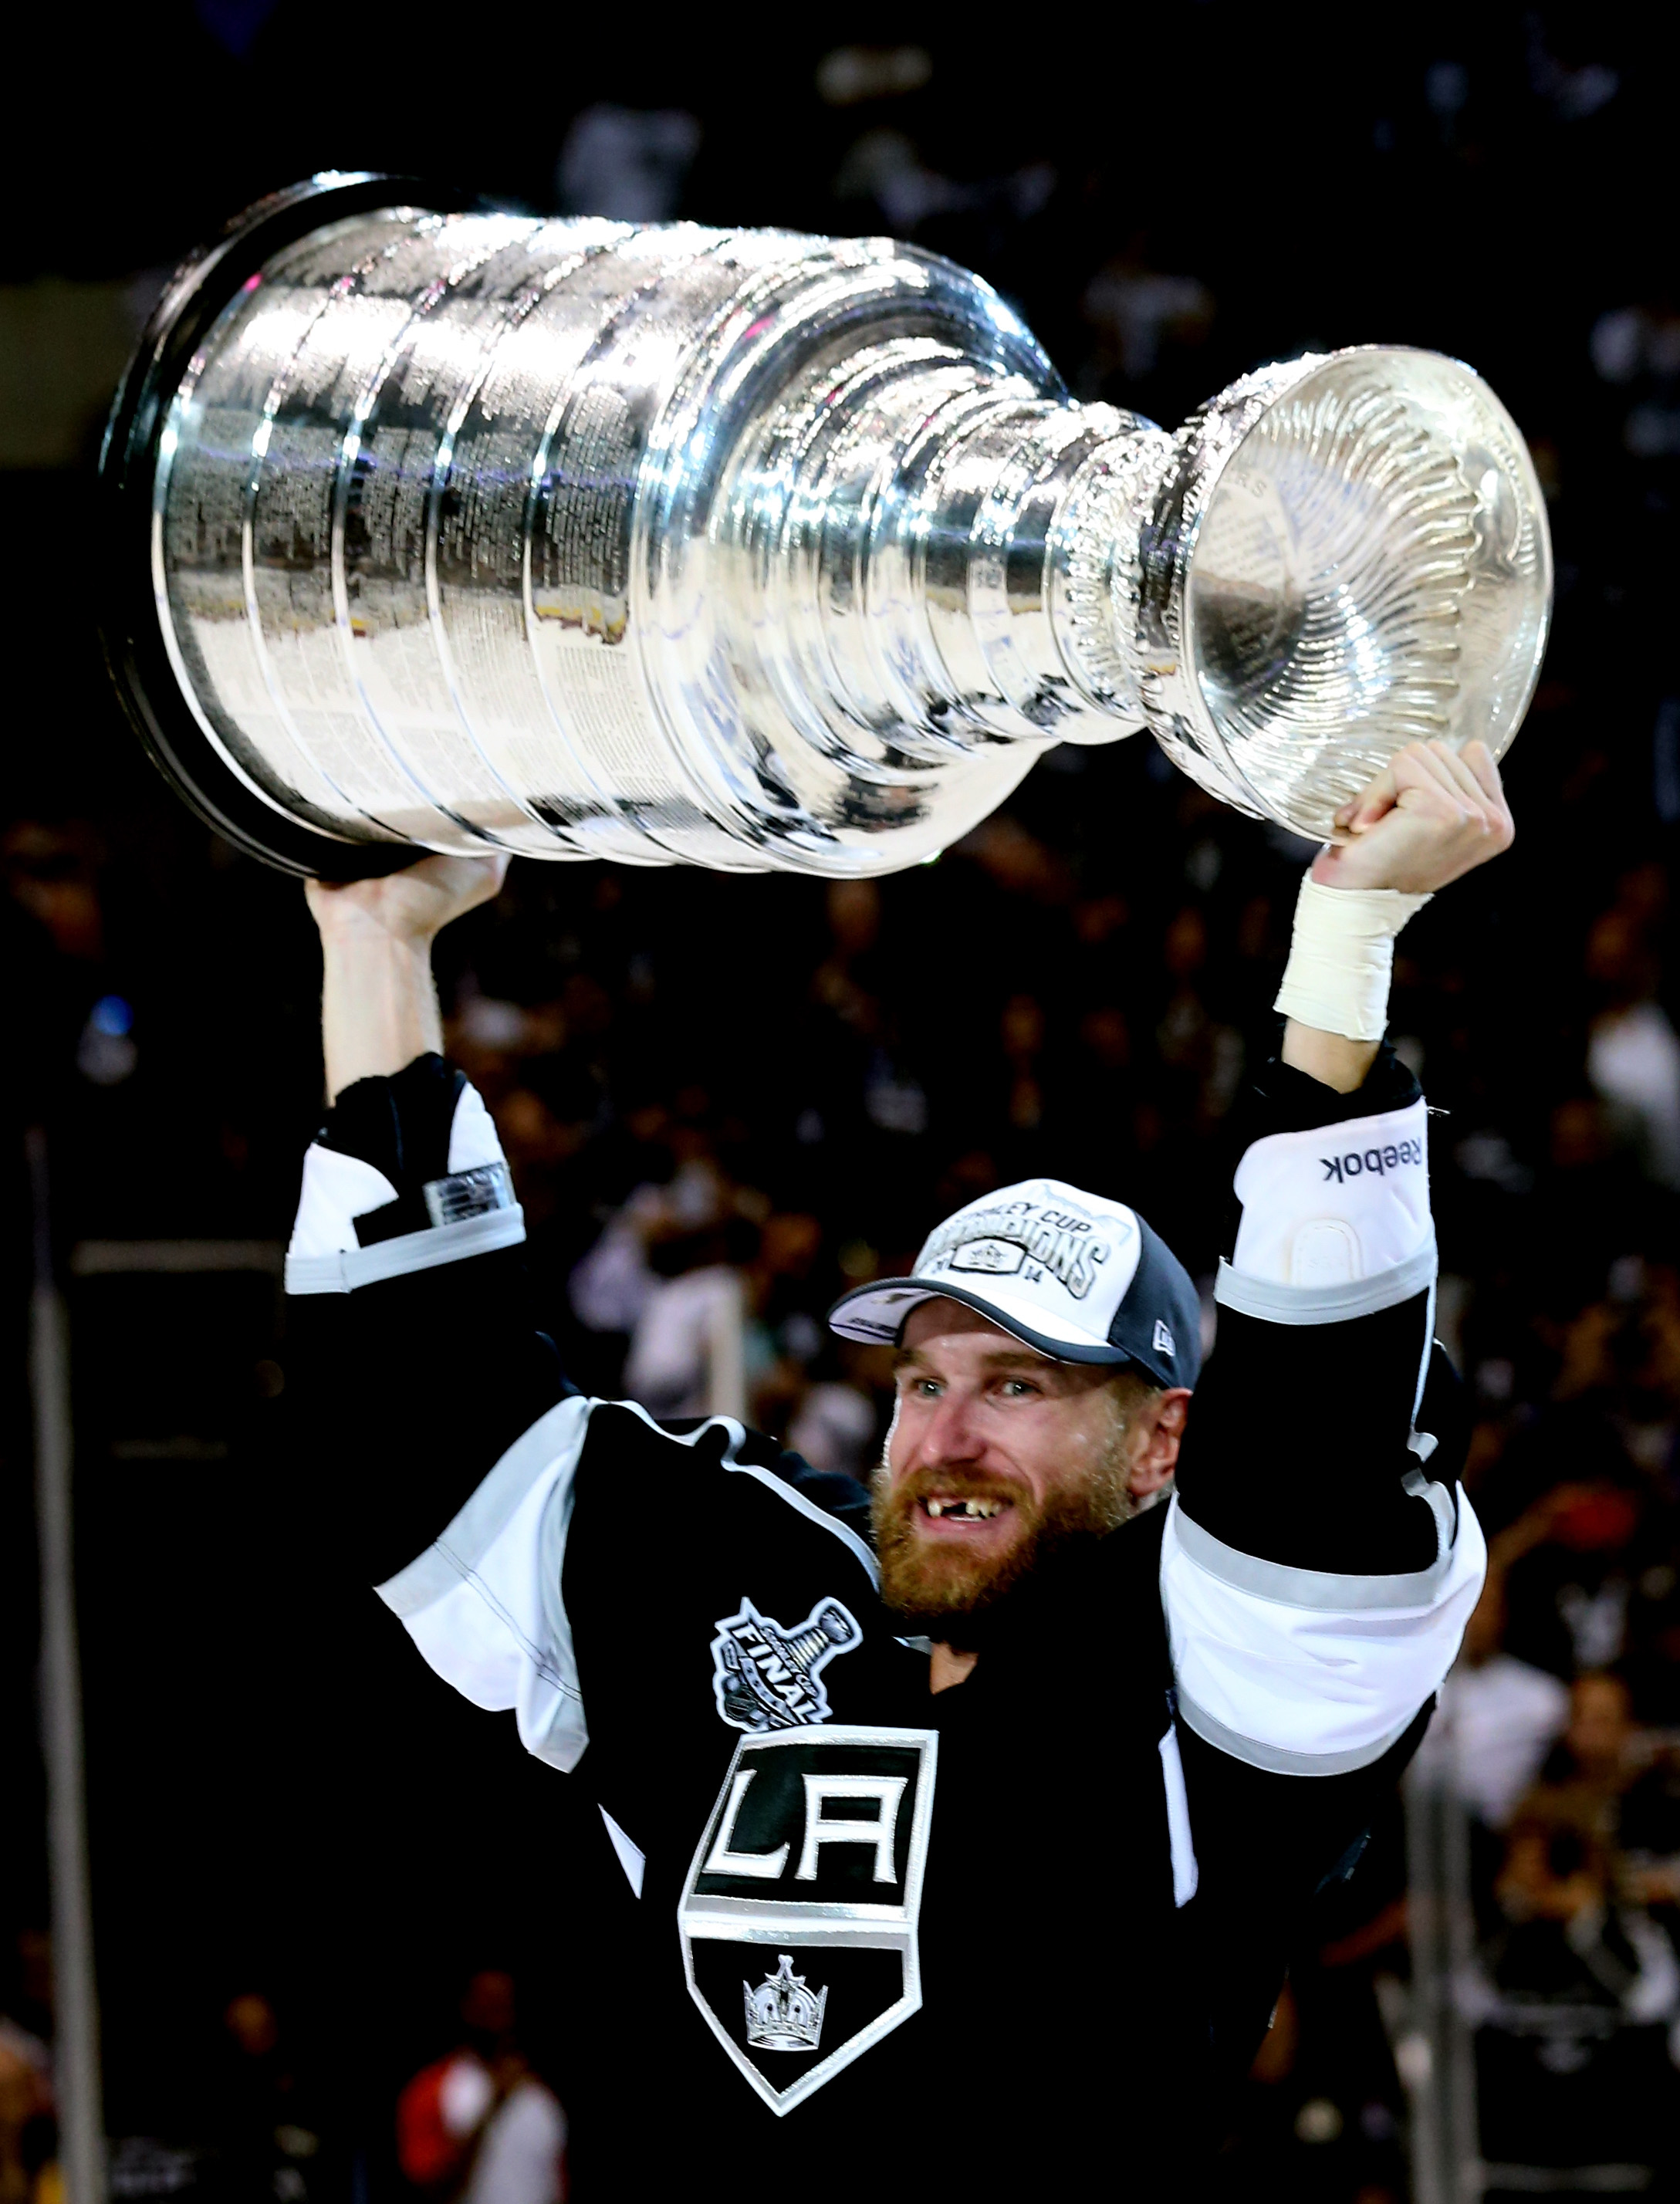 Congrats to the 2014 Stanley Cup Champion Los Angeles Kings